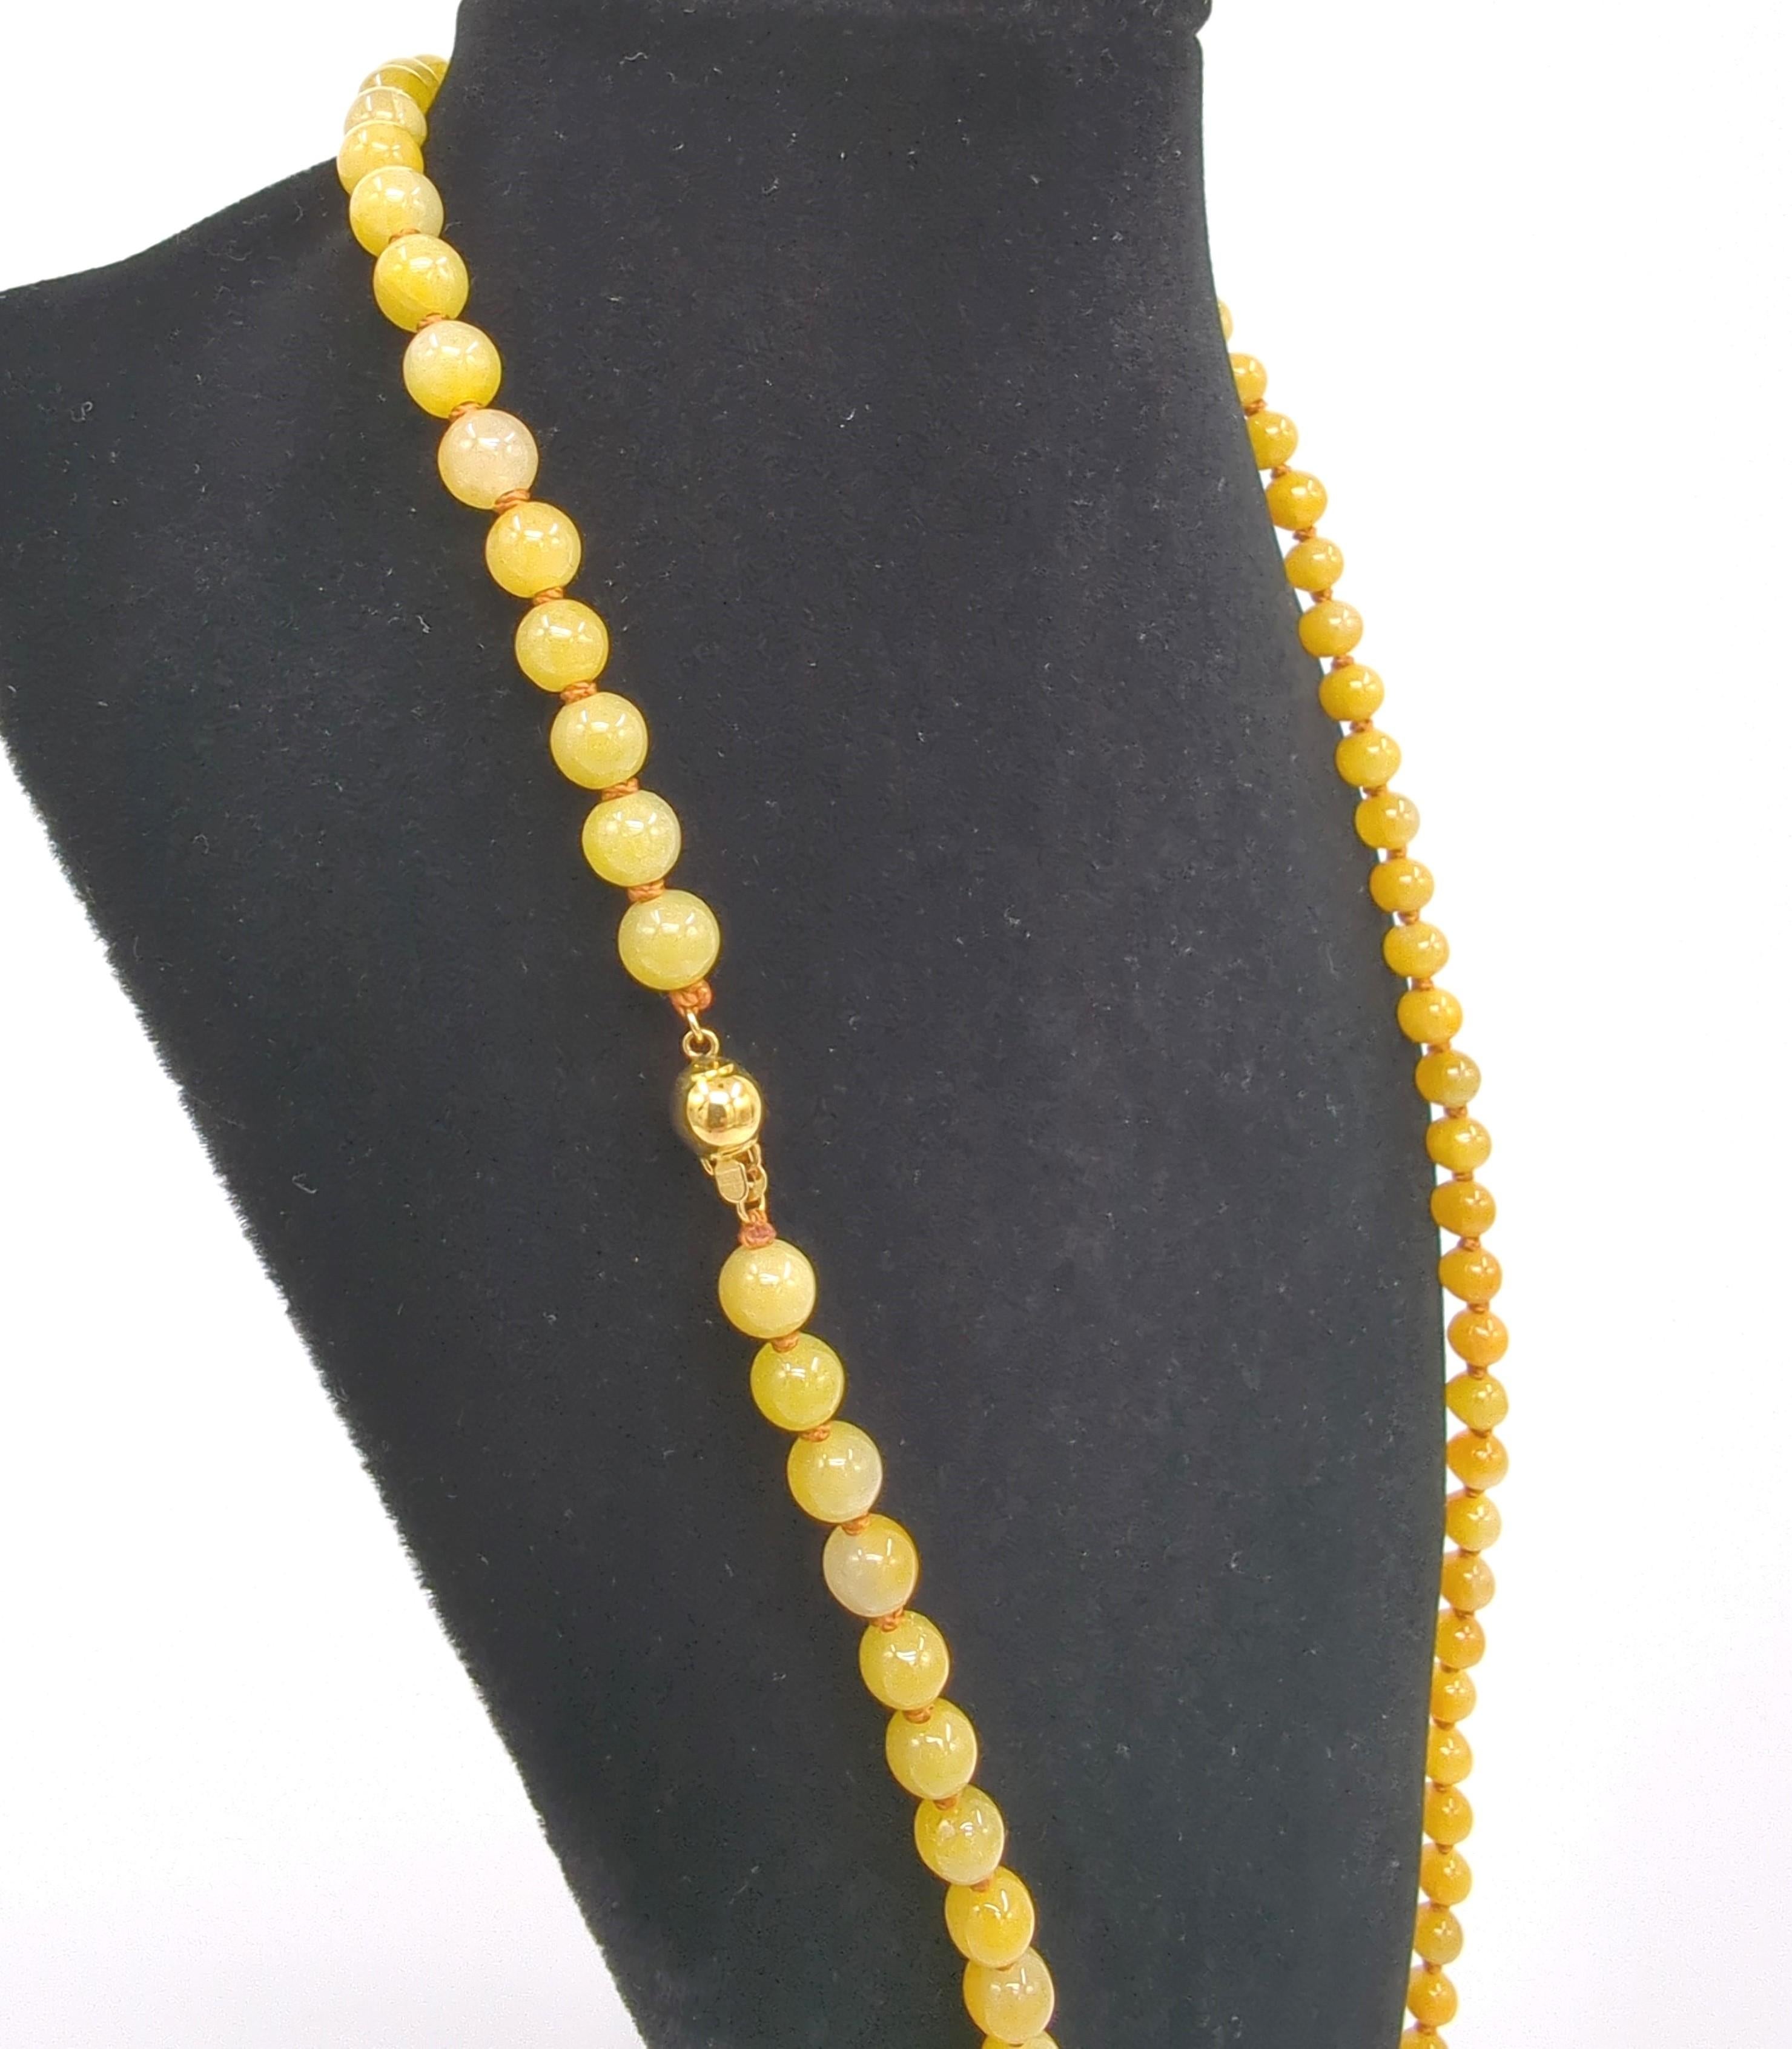 This stunning necklace features a strand of A-grade jadeite beads, each meticulously selected for its intense yellow hue. The bold coloration of the jadeite makes a striking statement, capturing attention and elevating any ensemble. The necklace is